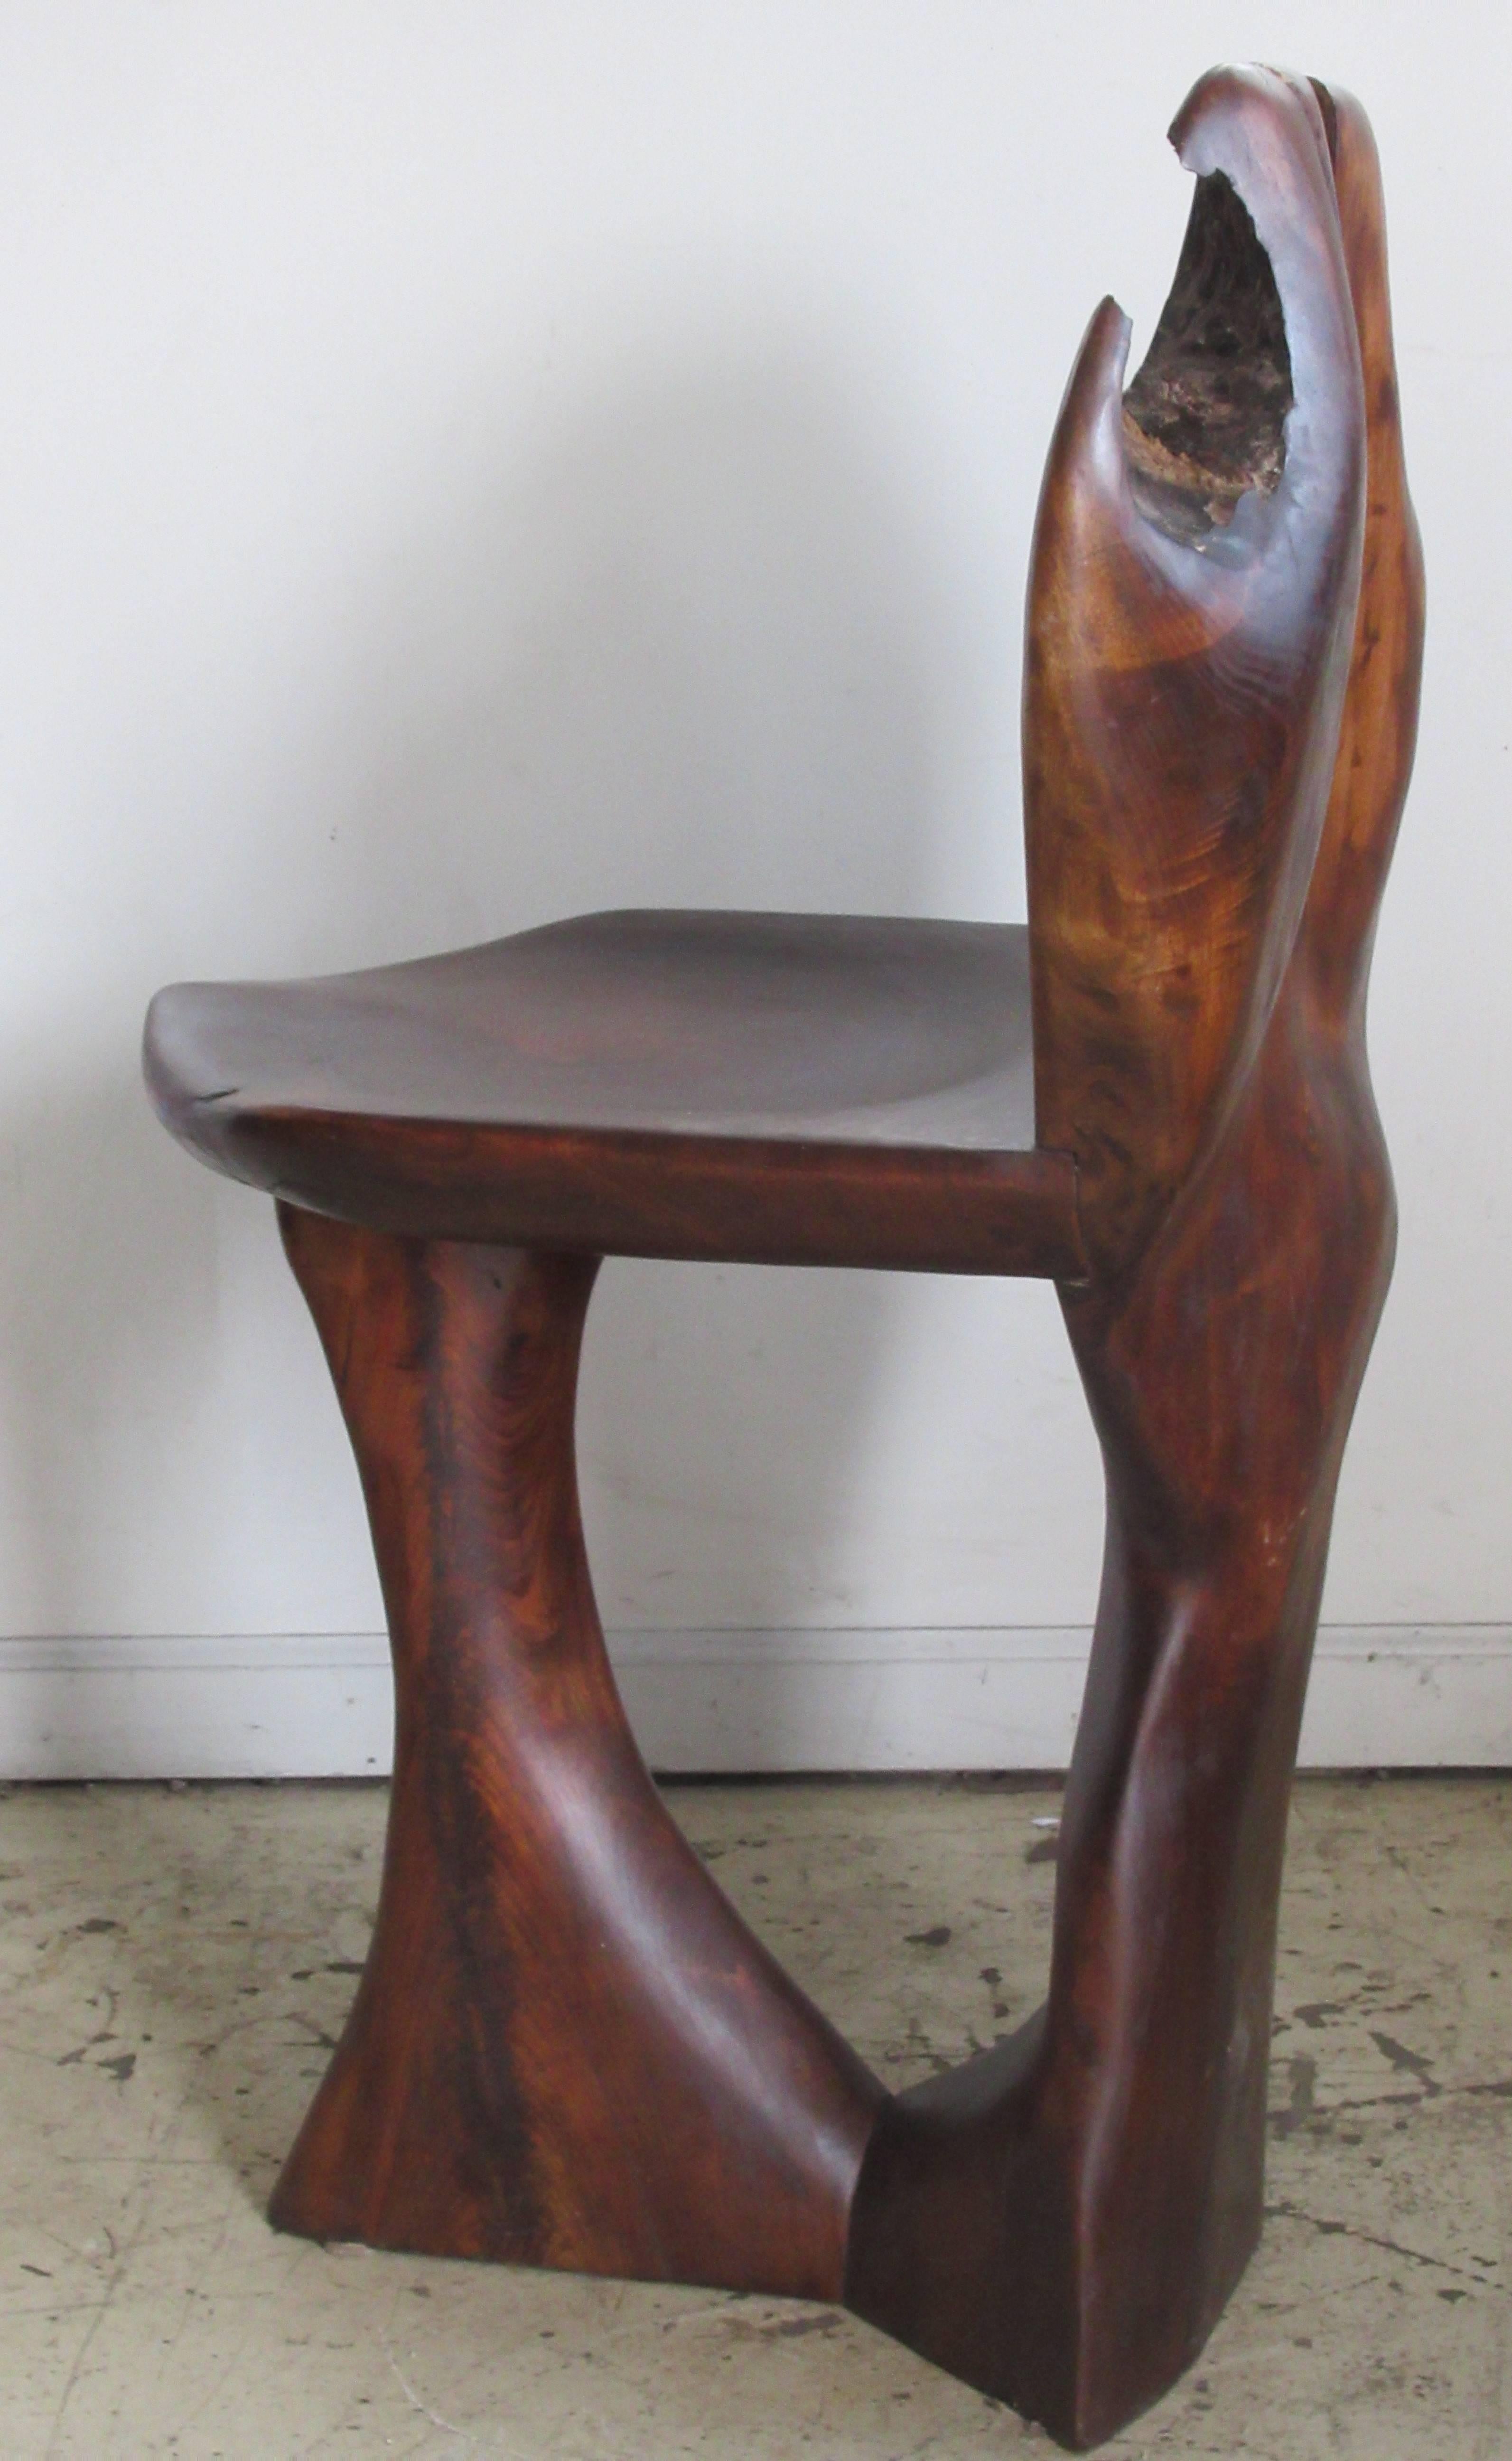 Hand-Crafted 1970s American Craft Movement Organic Modern Chair